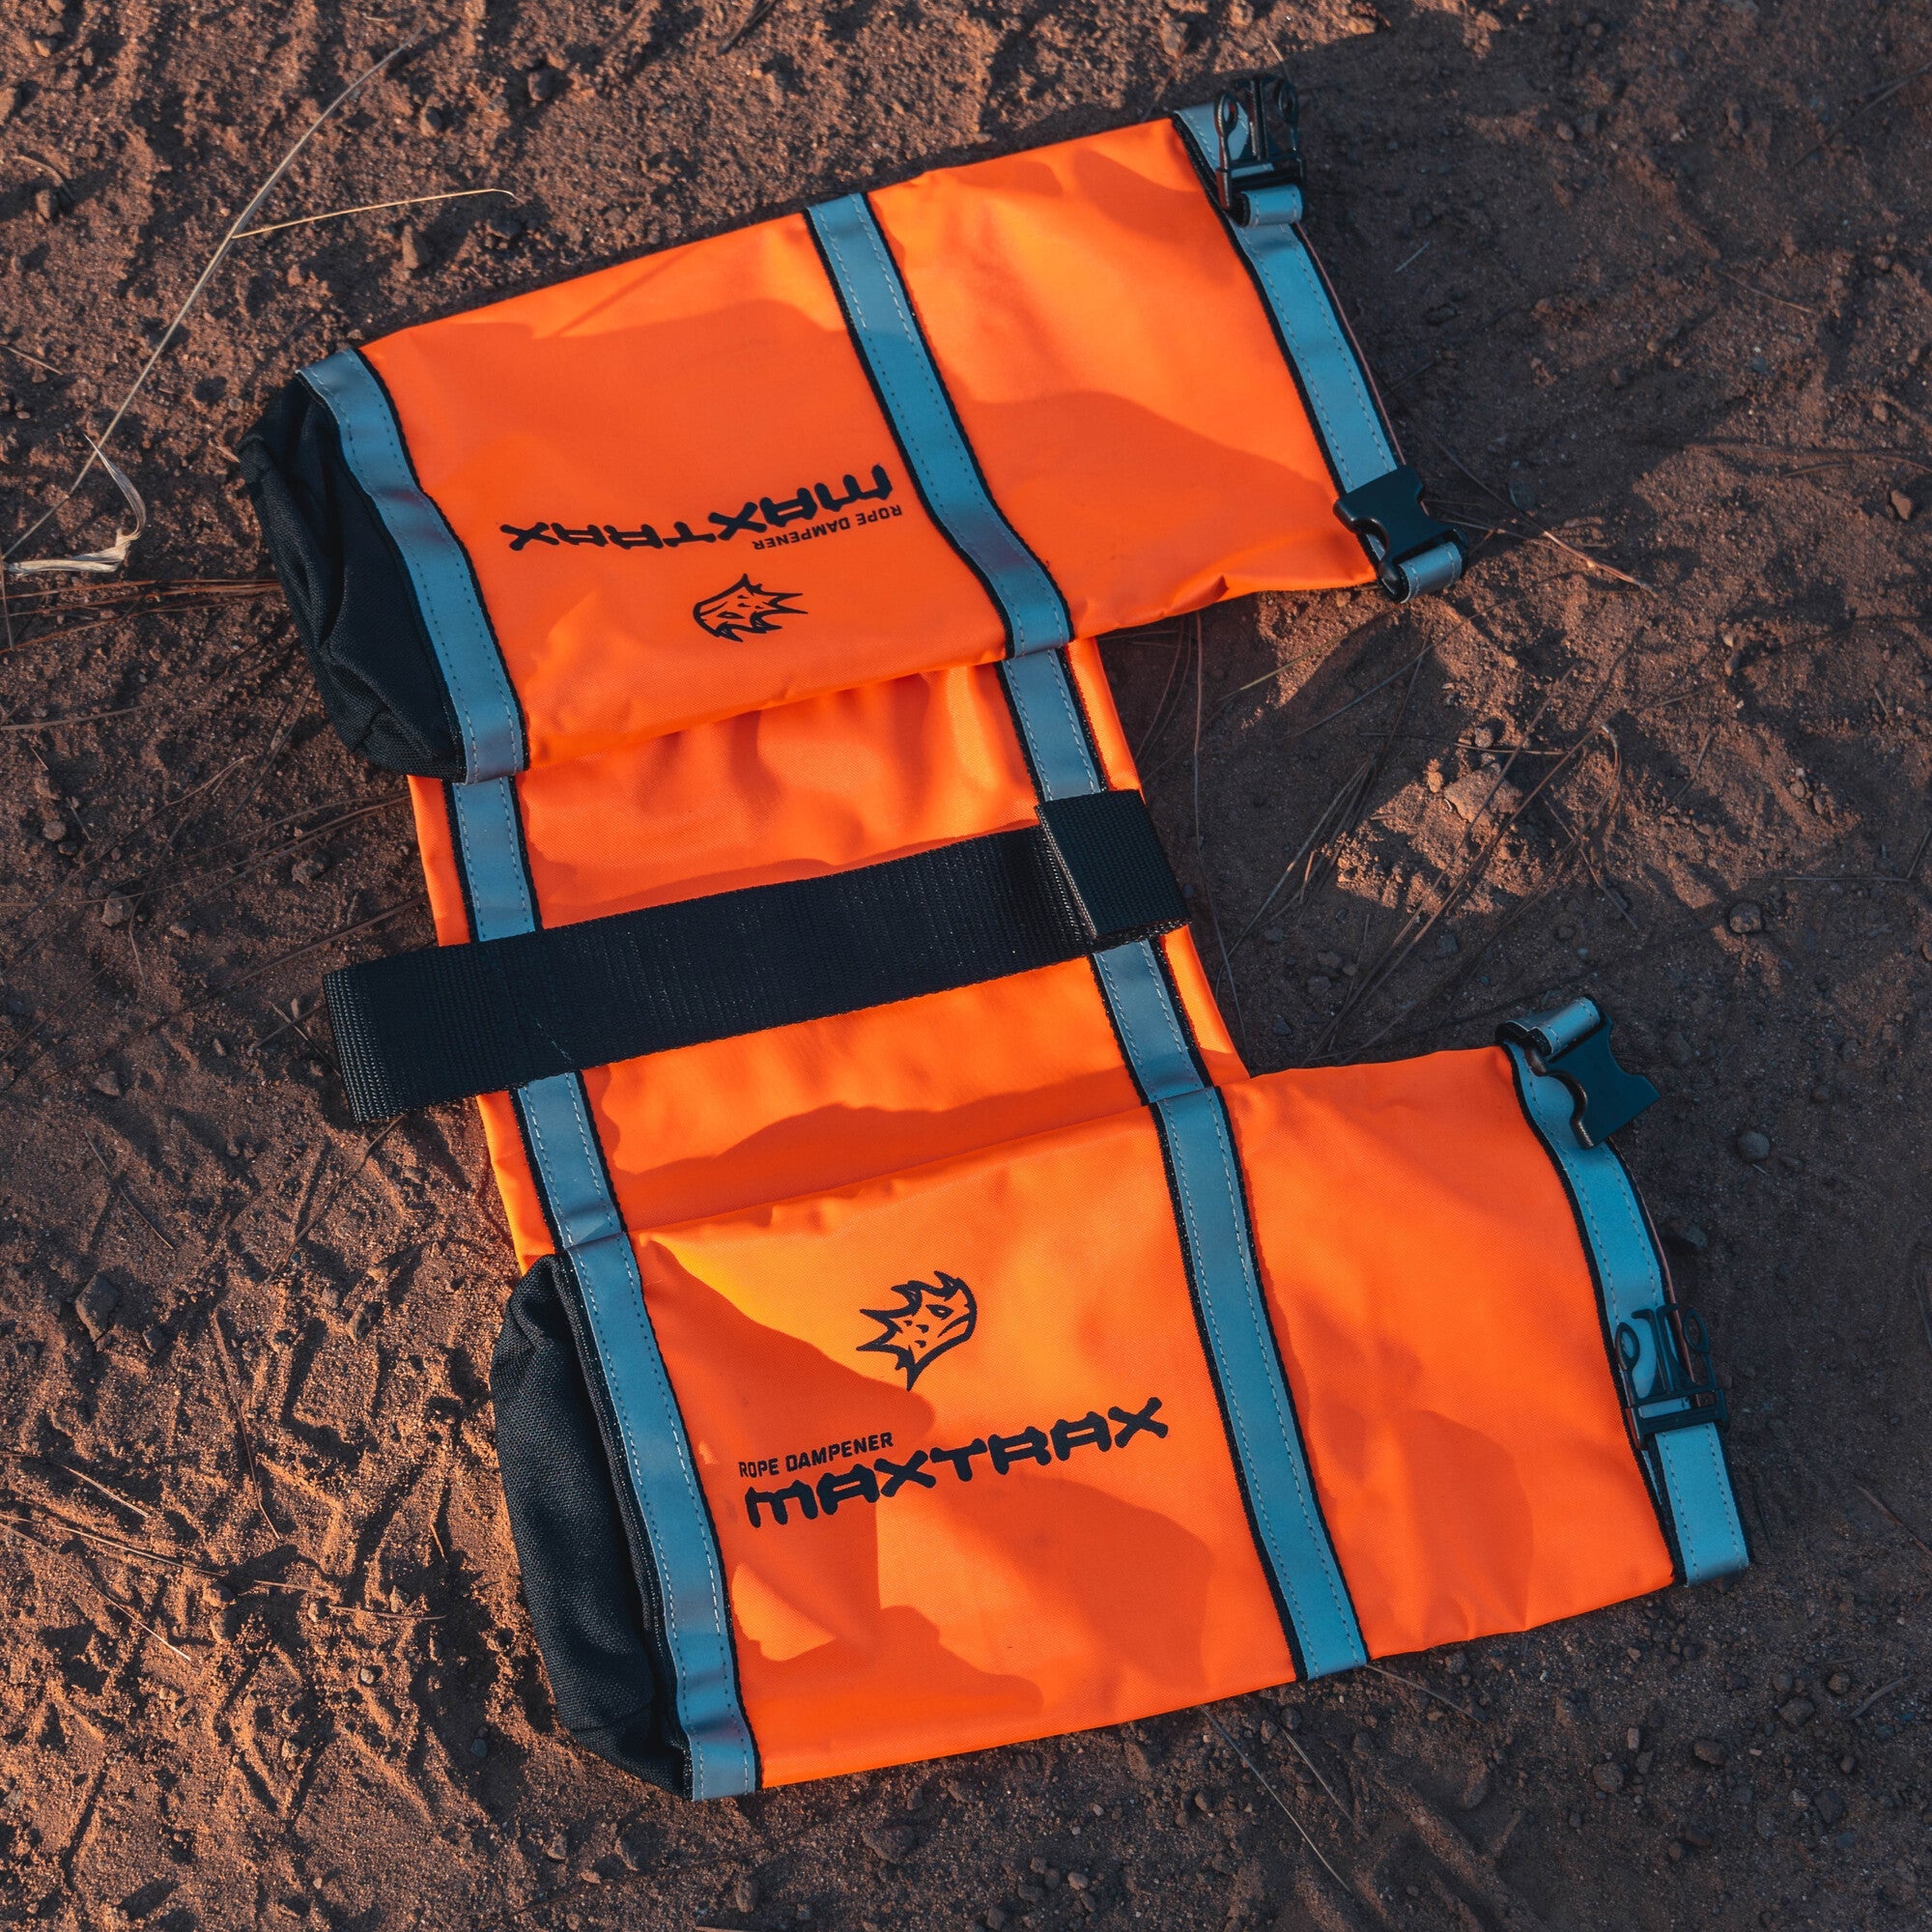 MAXTRAX Rope Dampener  Recovery Gear MAXTRAX- Overland Kitted